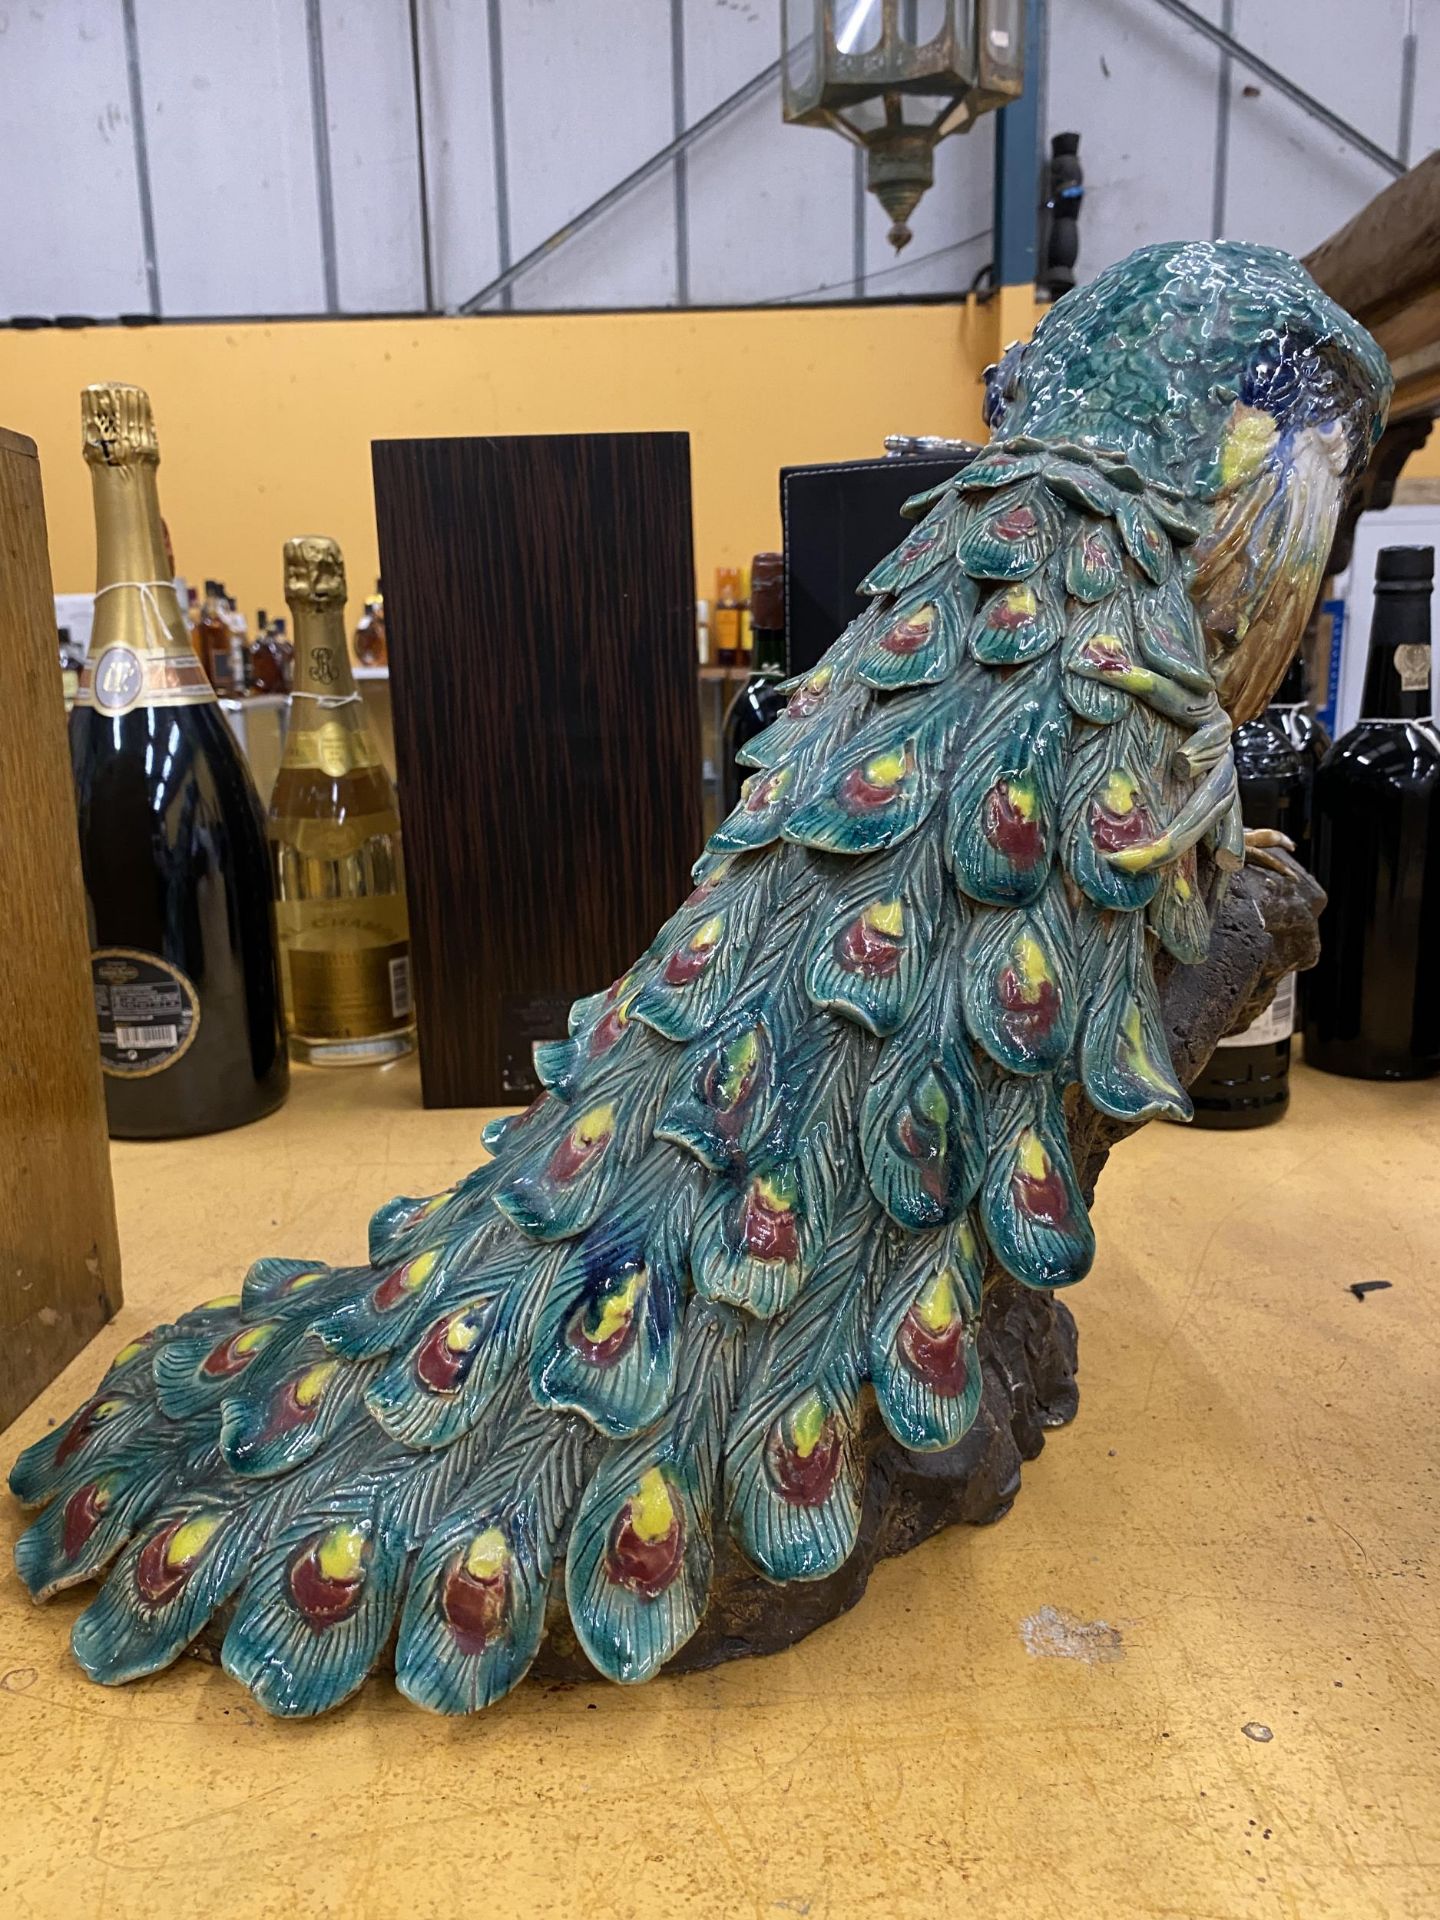 A LARGE MAJOLICA STYLE PEACOCK CERAMIC FIGURE, A/F HEIGHT APPROX 39CM, WIDTH 40CM - Image 6 of 6